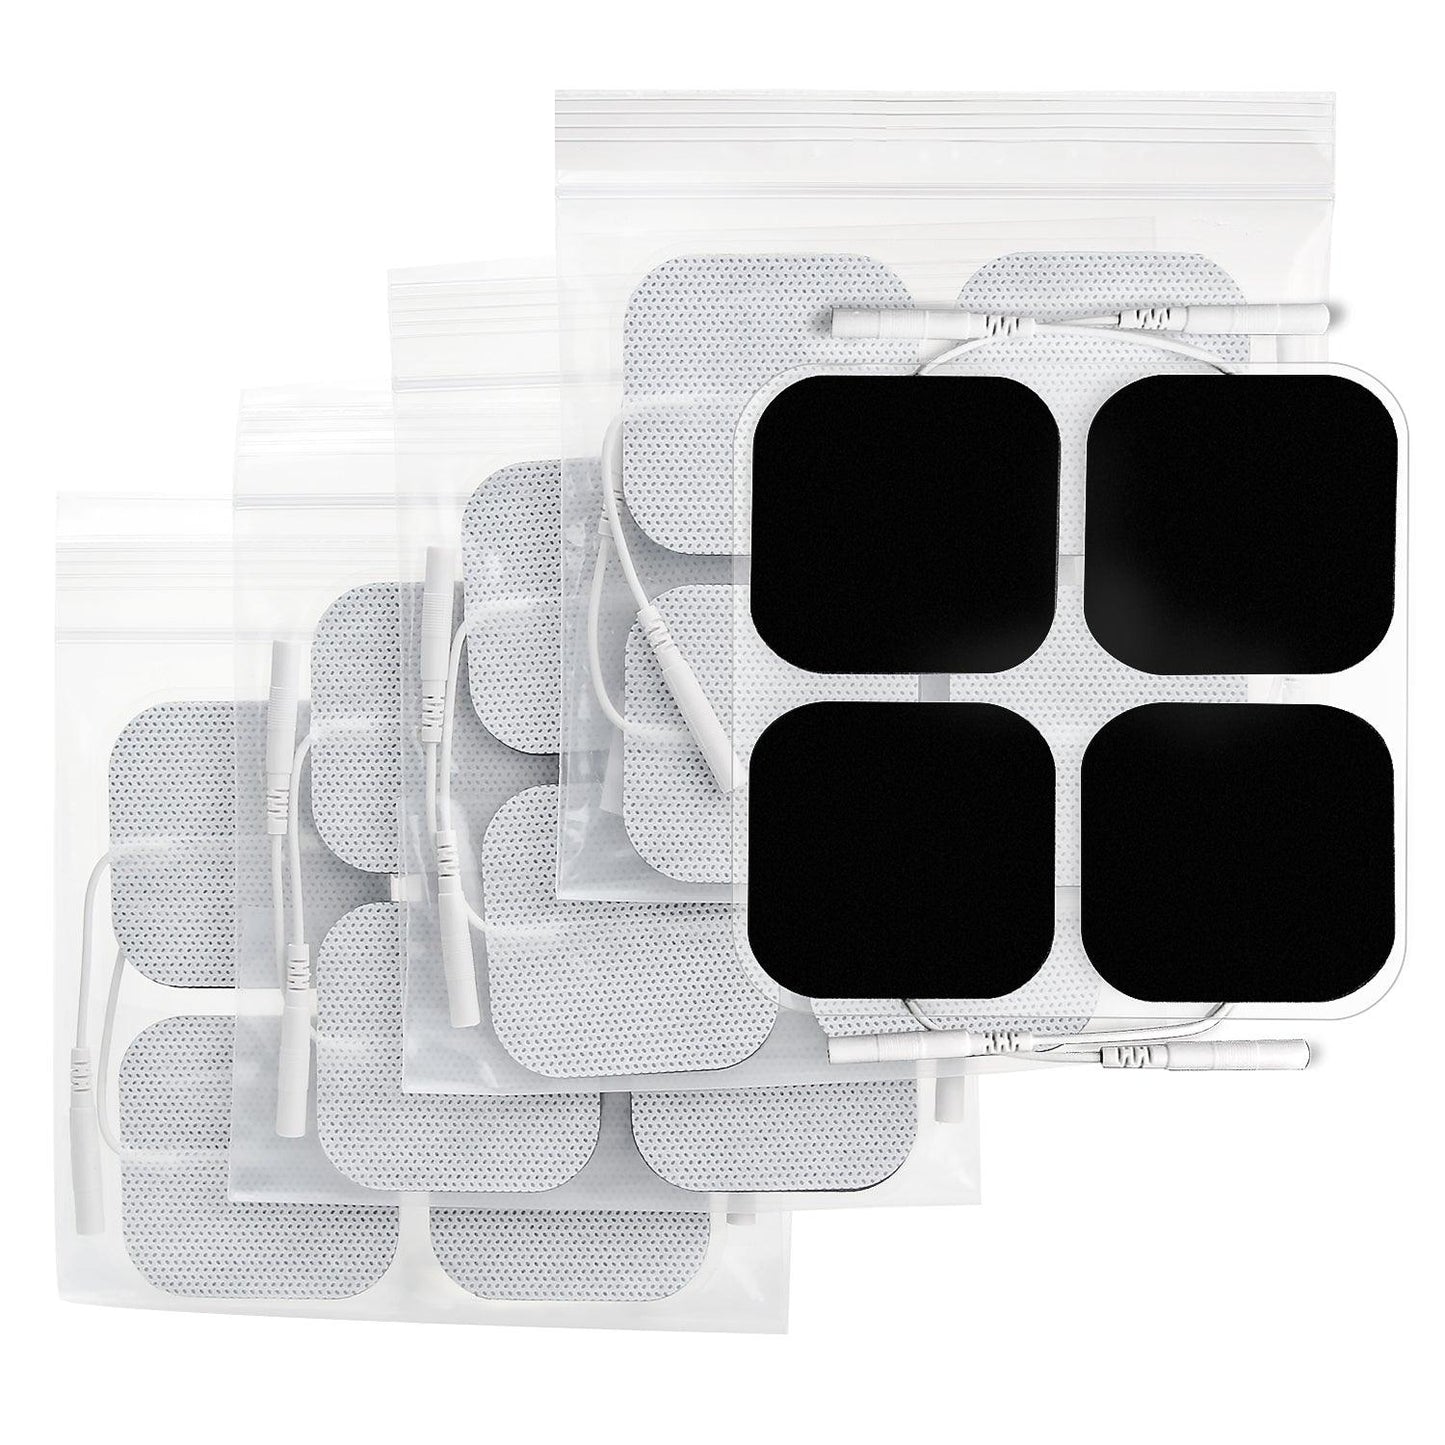 AUVON TENS Unit Pads 2X2 20 Pcs, 3rd Gen Latex-Free Replacement Pads  Electrode Patches